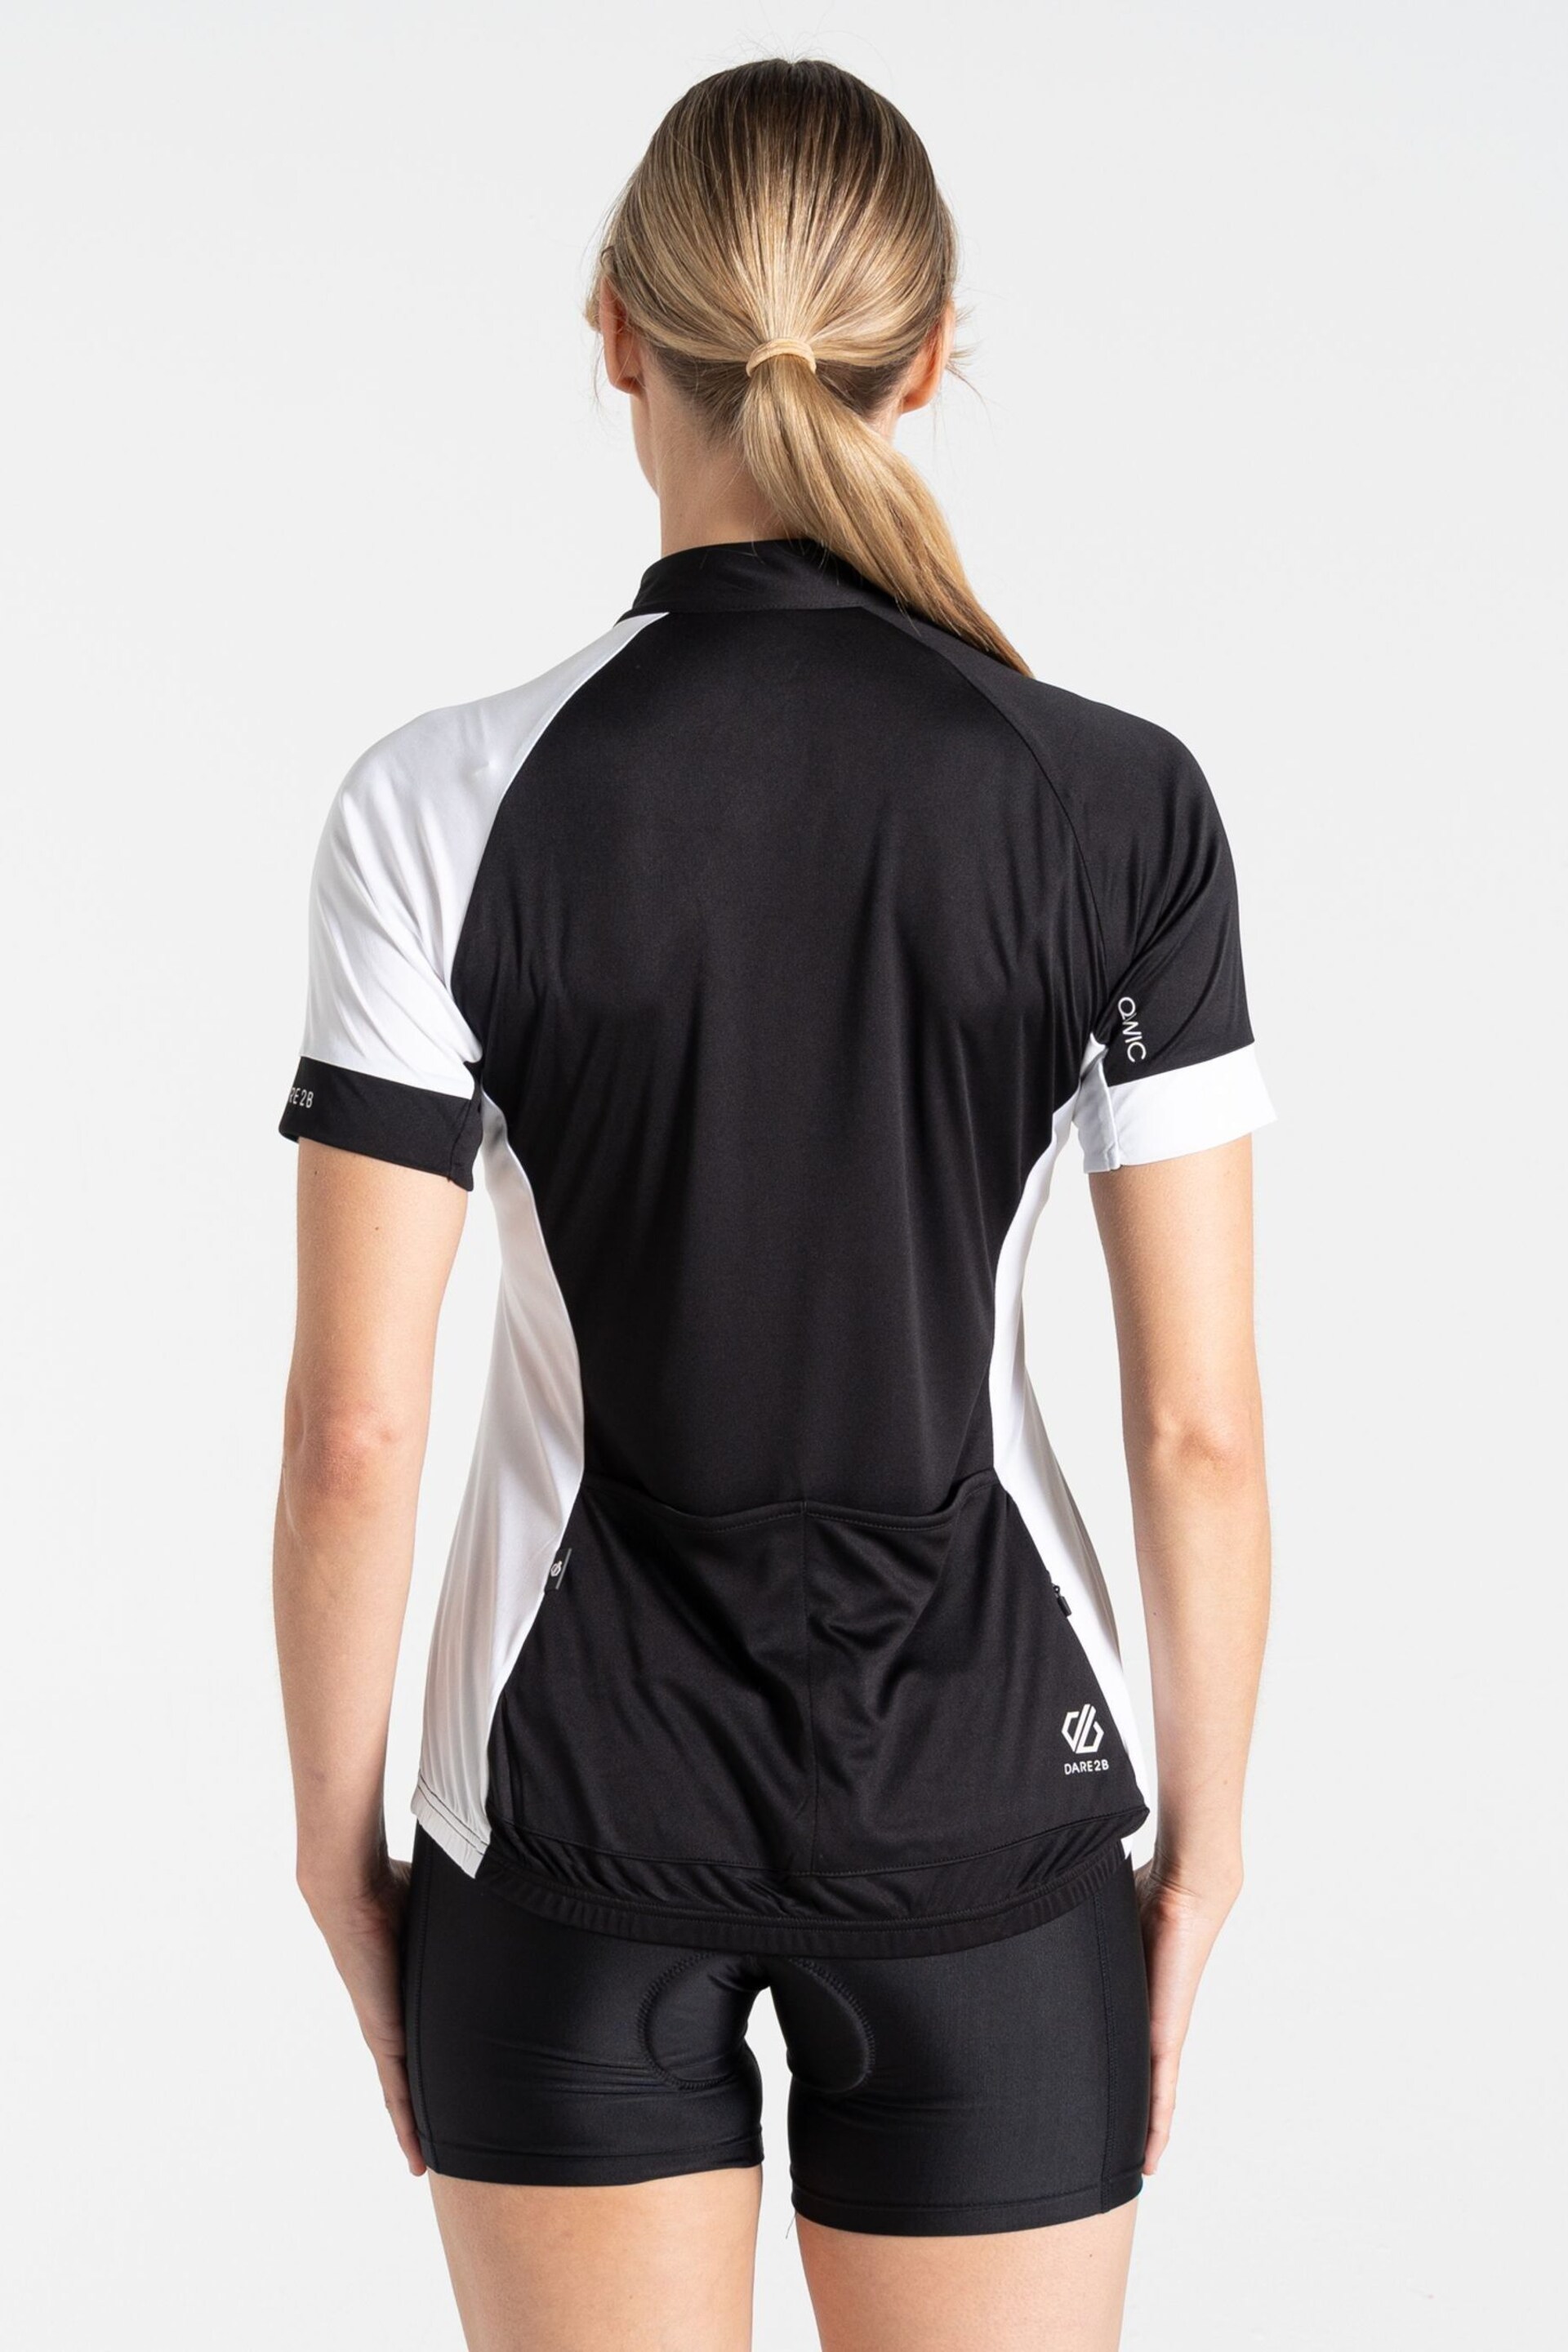 Dare 2b Compassion III Cycle Black Jersey - Image 3 of 4